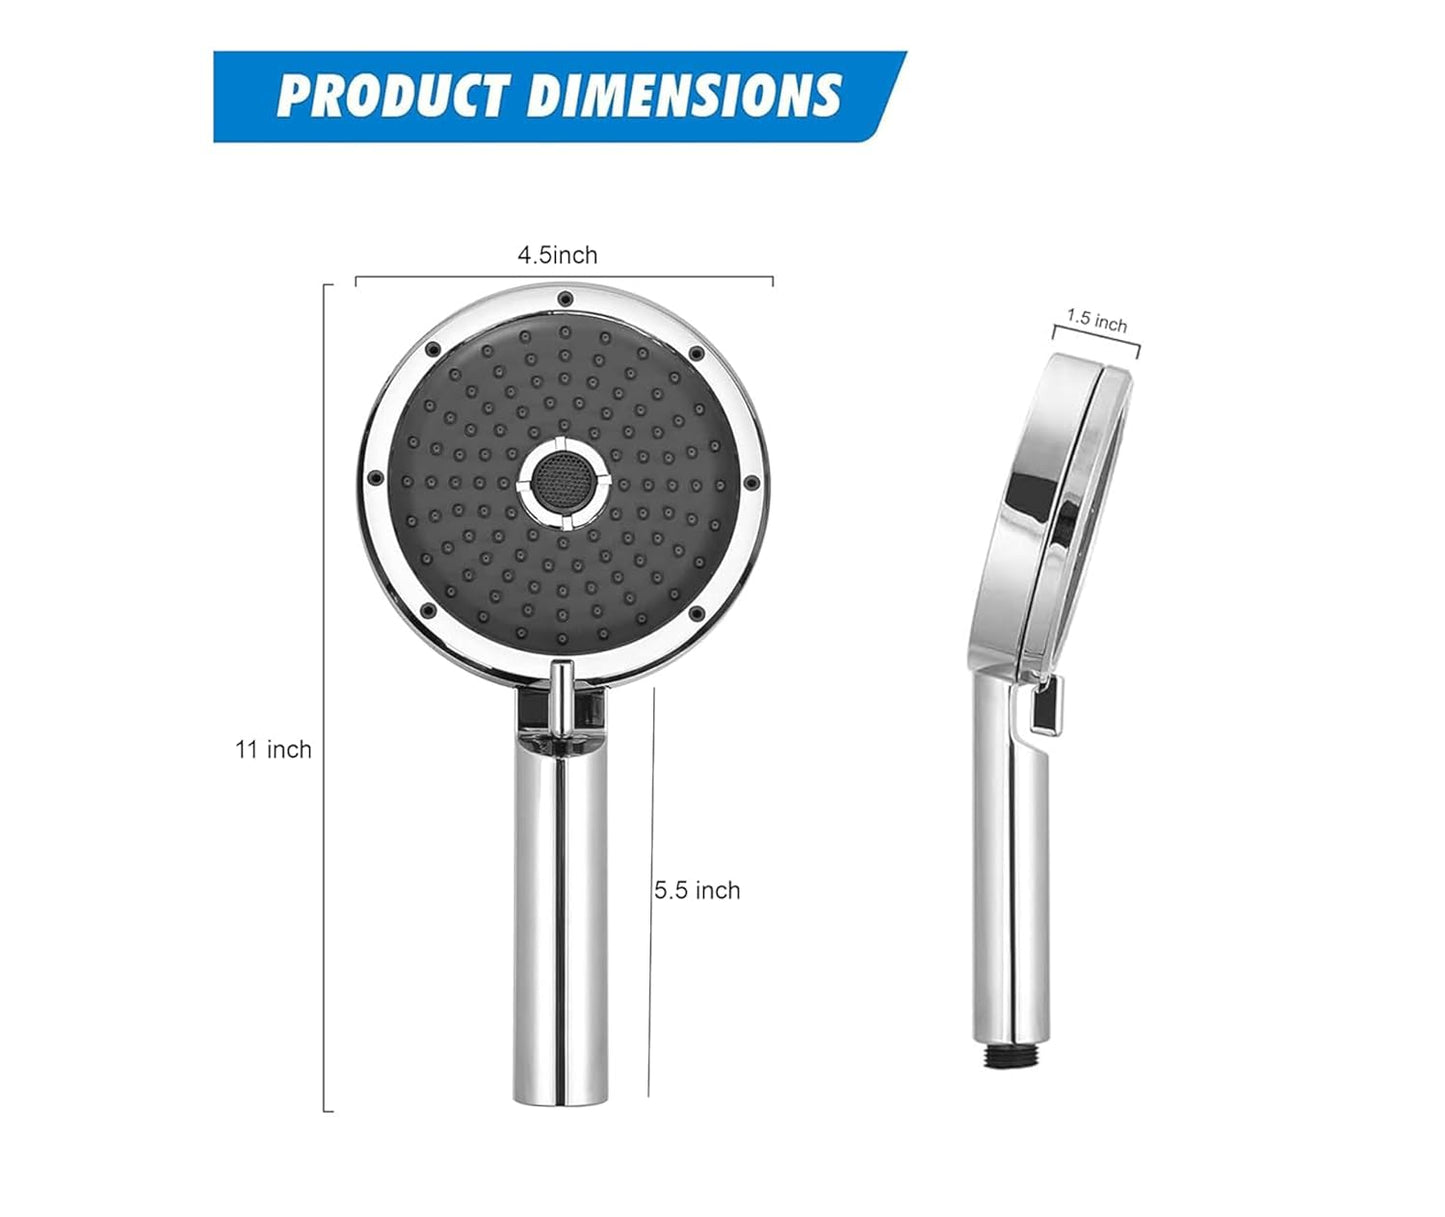 Dimension of hand shower 